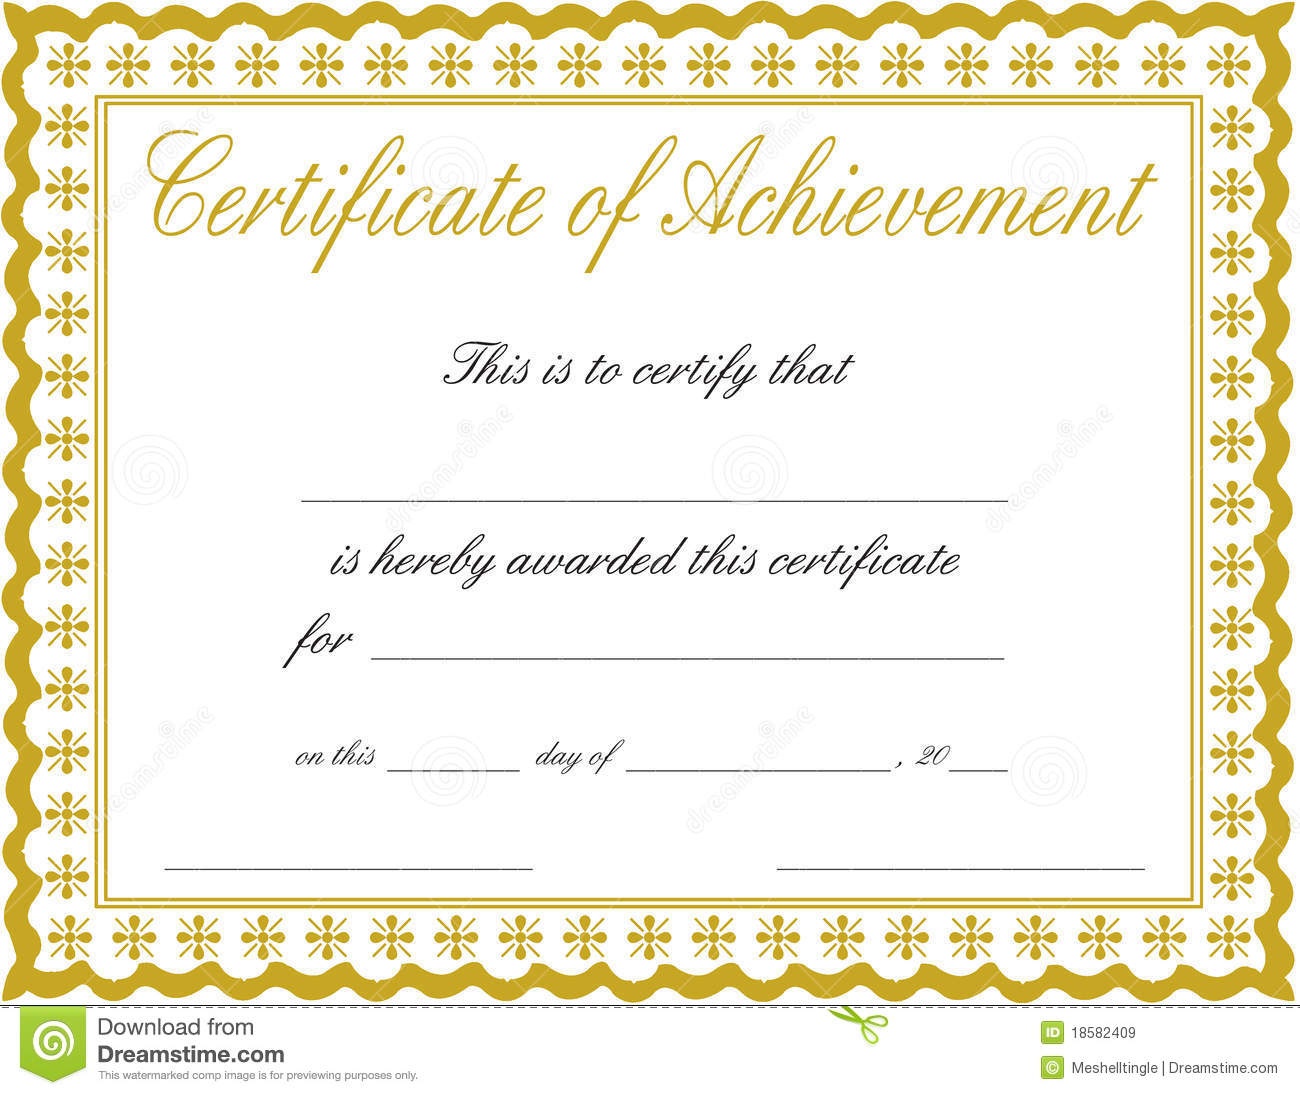 Certificate Of Accomplishment Template Free - Tutlin.psstech.co - Free Printable Softball Certificates